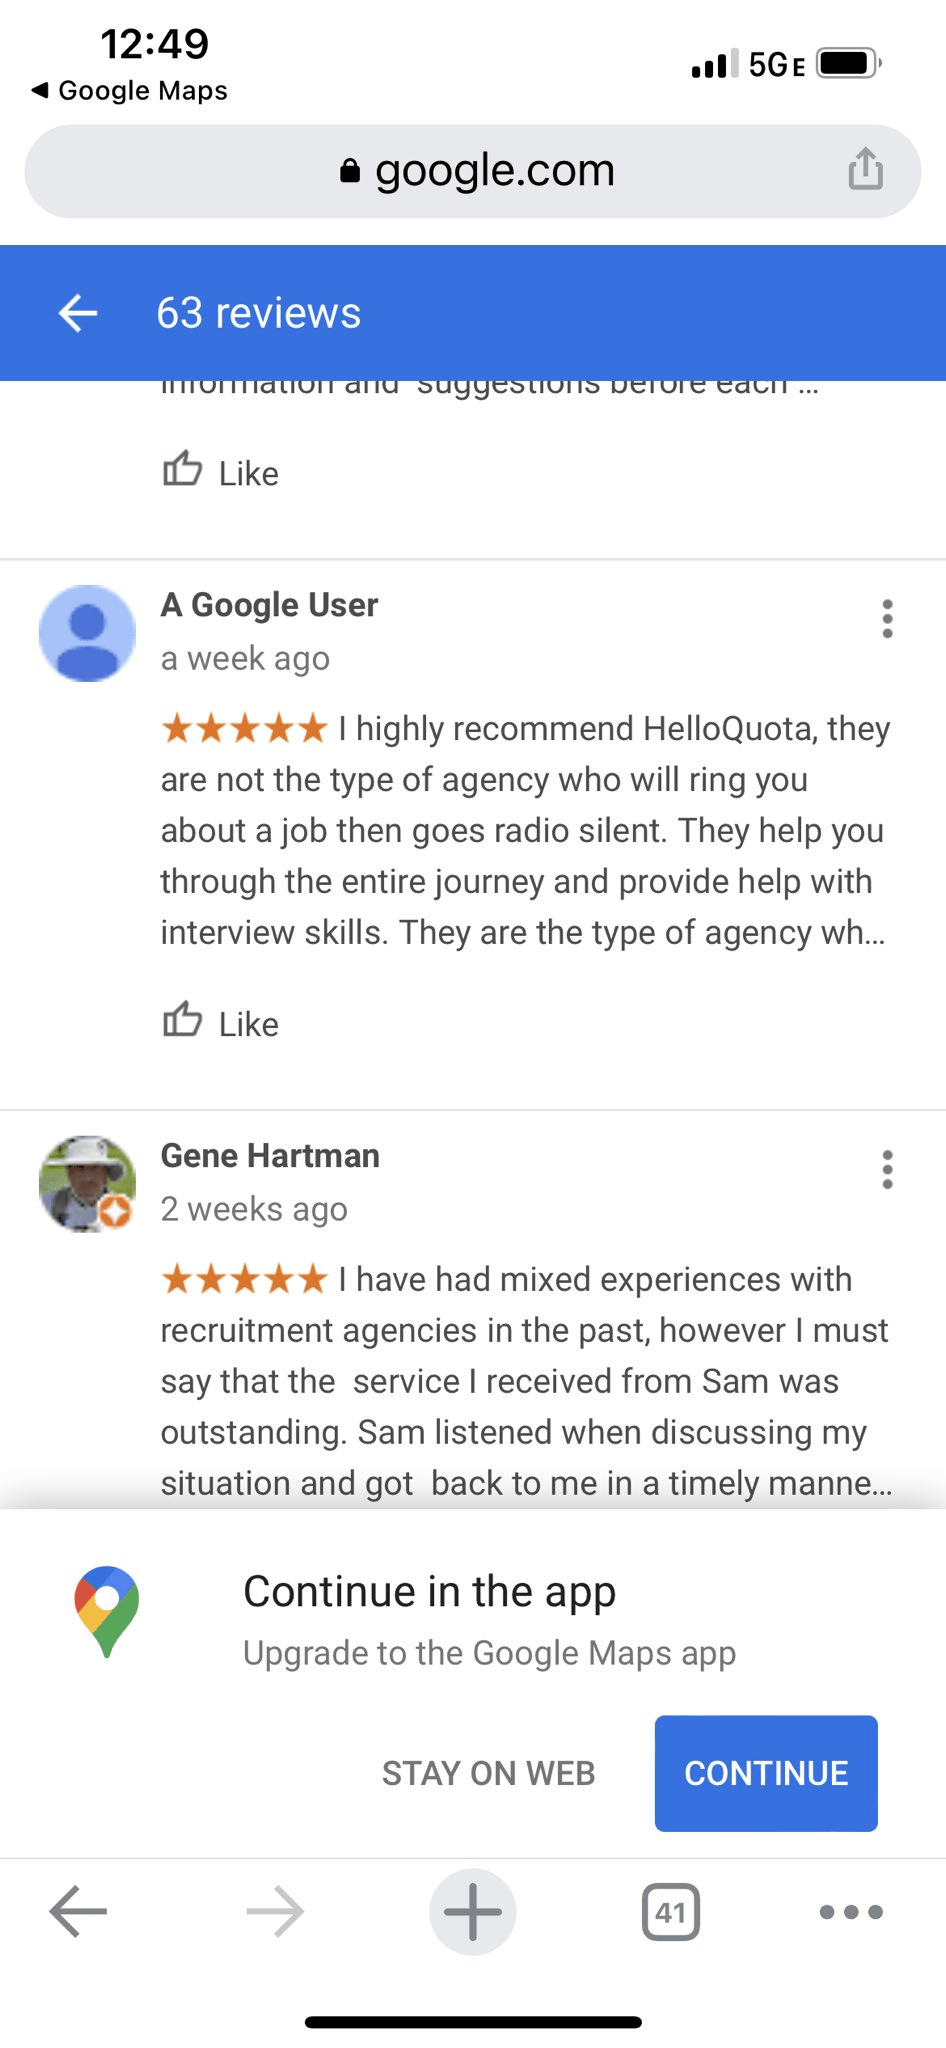 An image showing a review on Google from "Google User" showcasing anonymous reviews